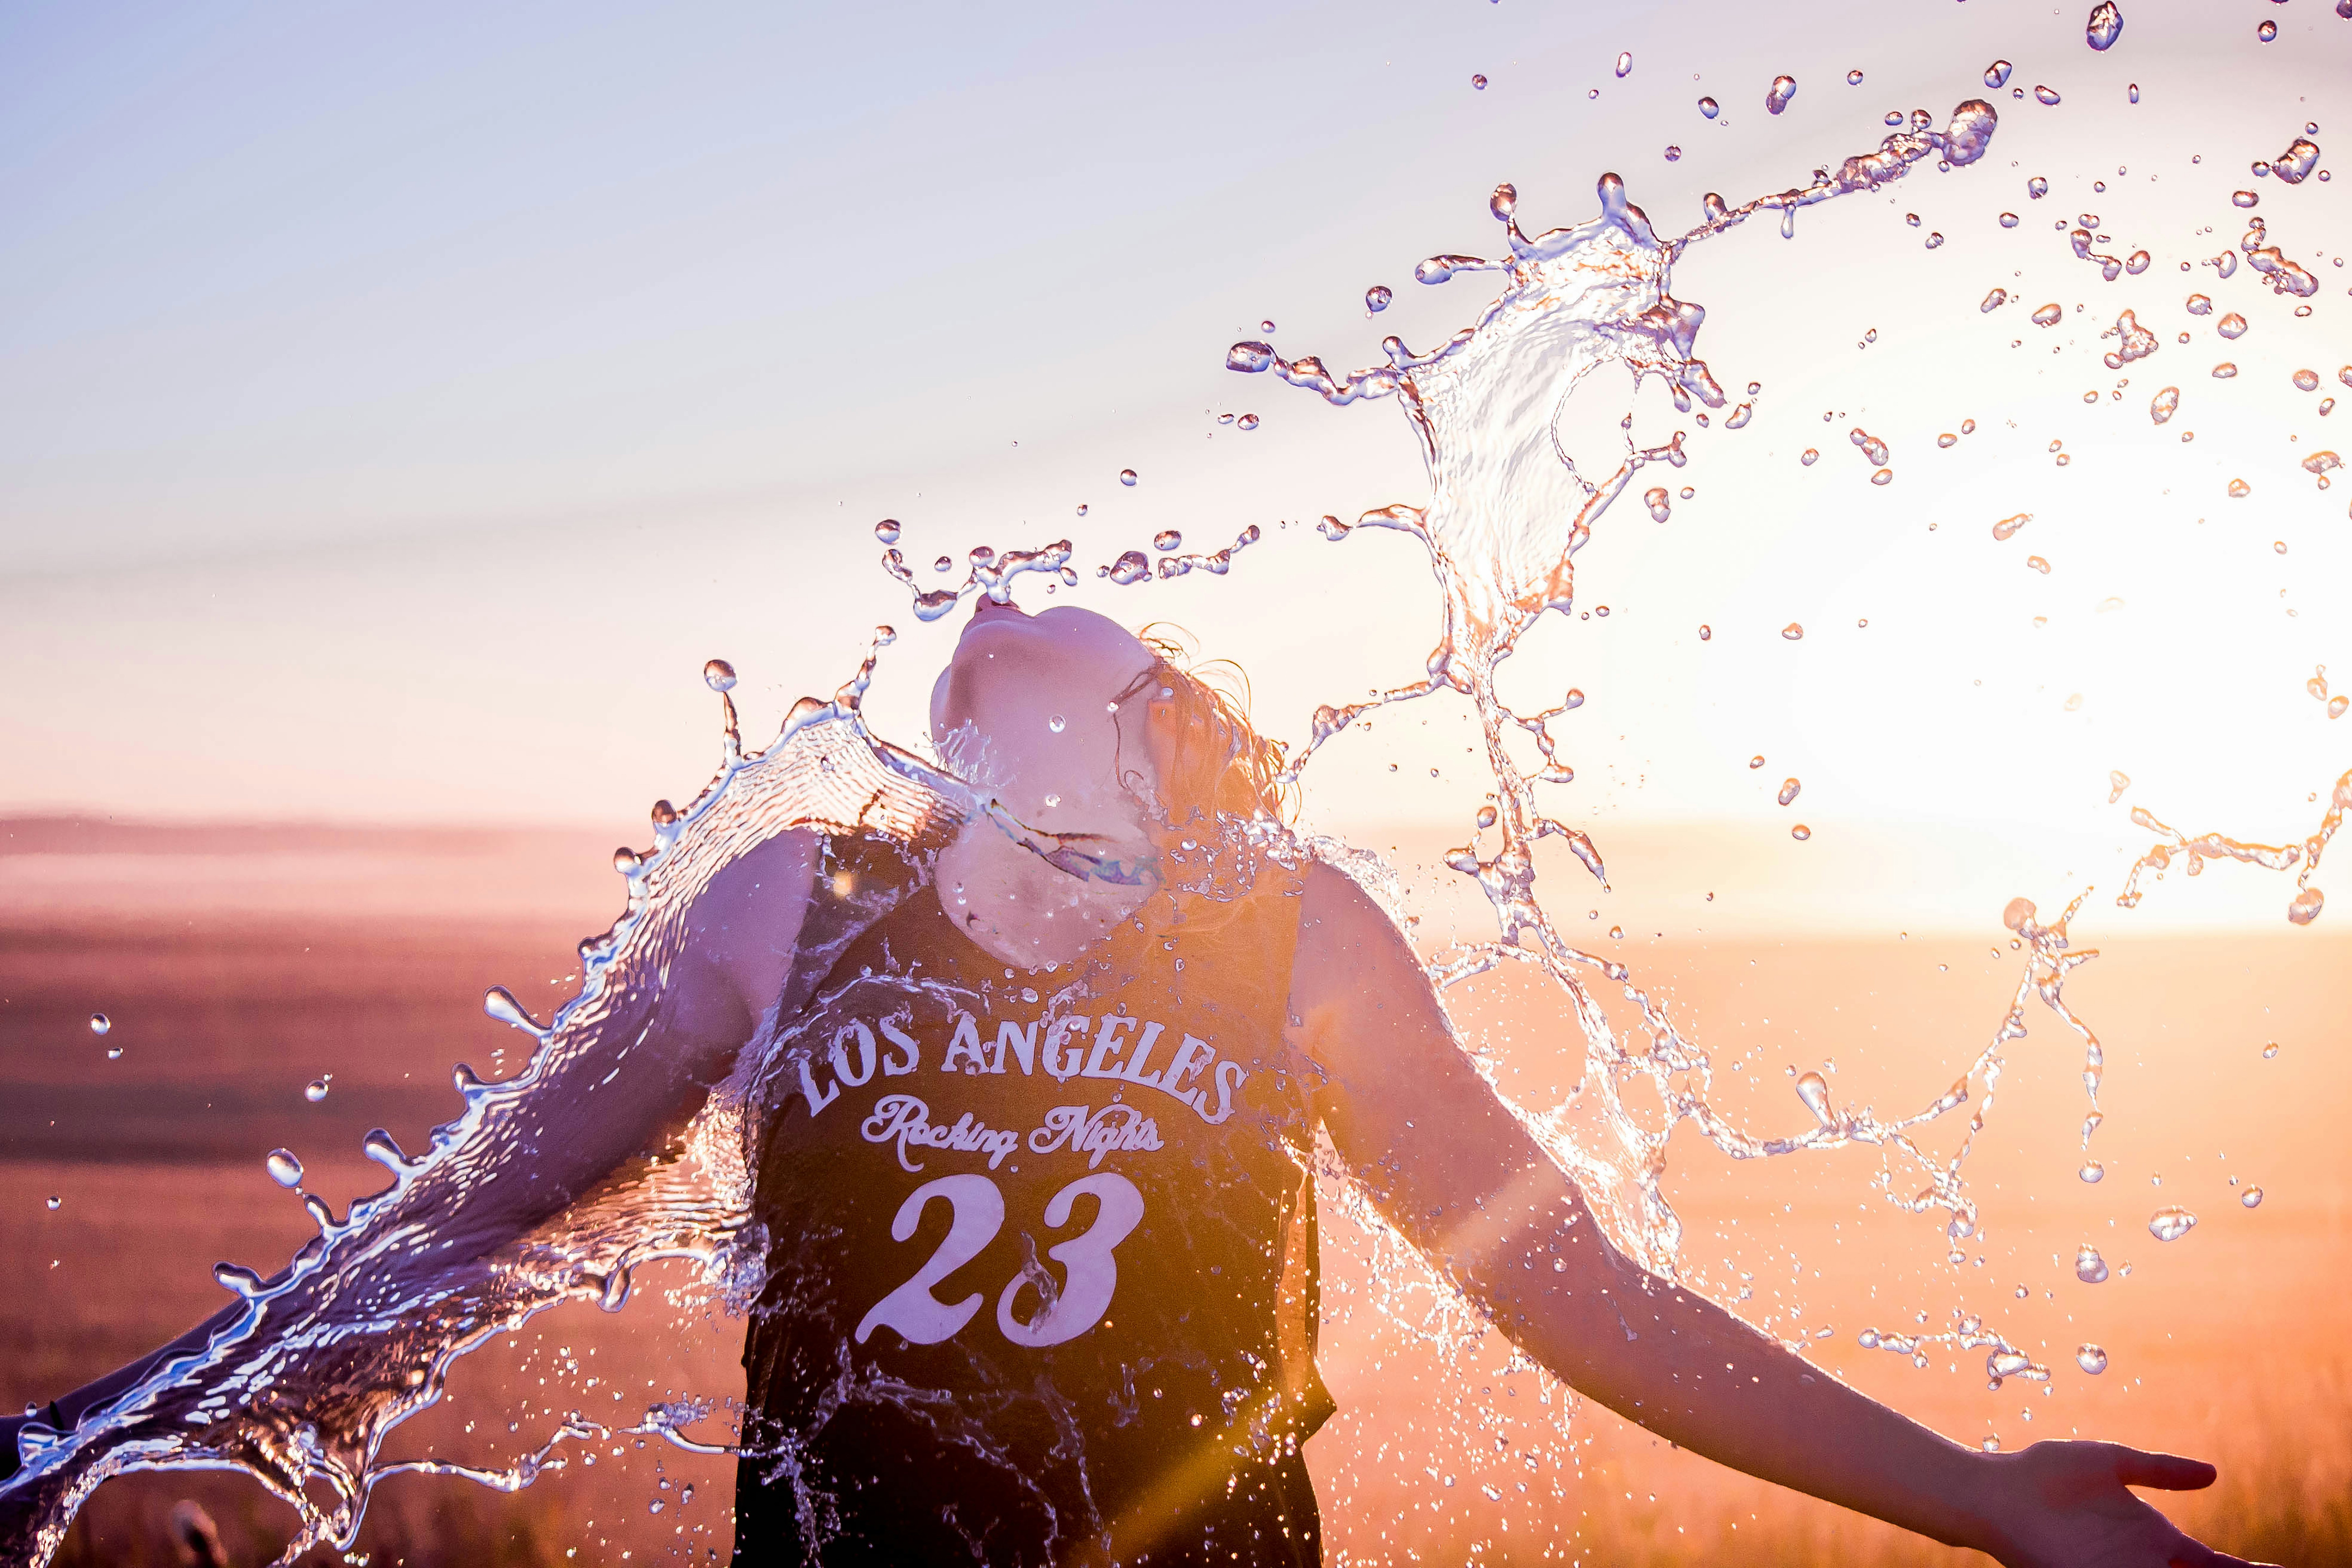 Water refreshes athlete